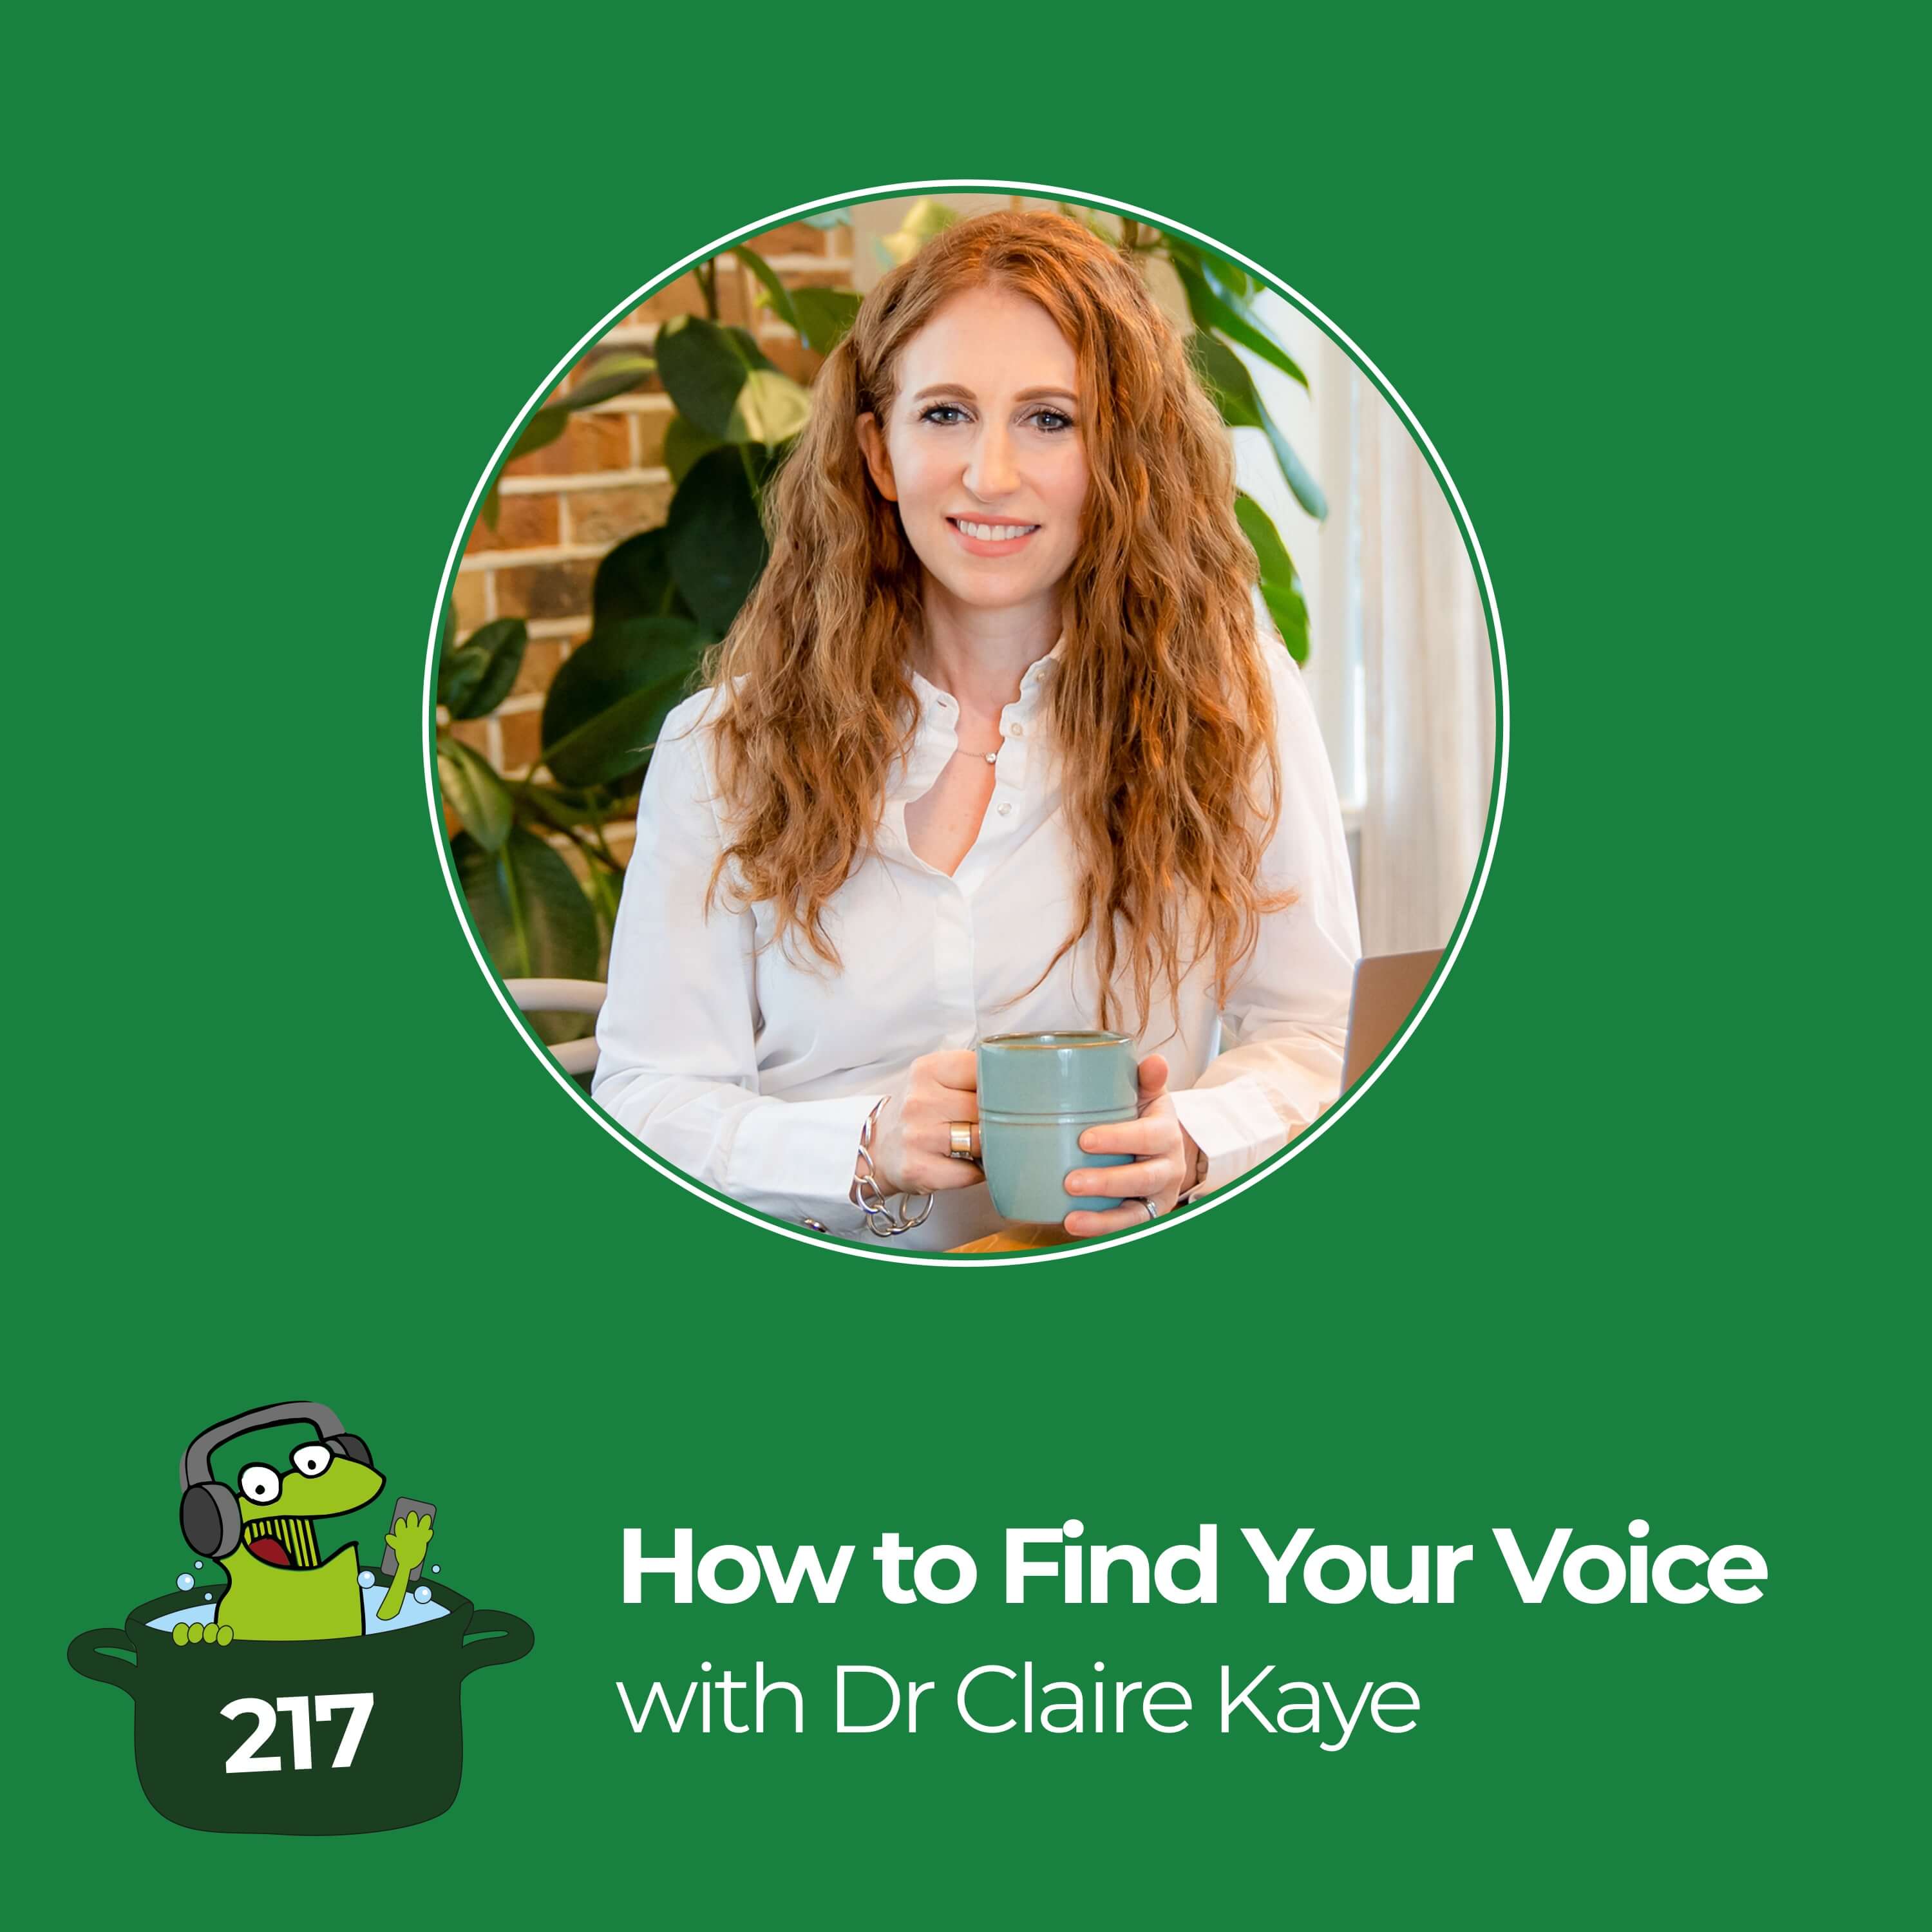 How to find your voice